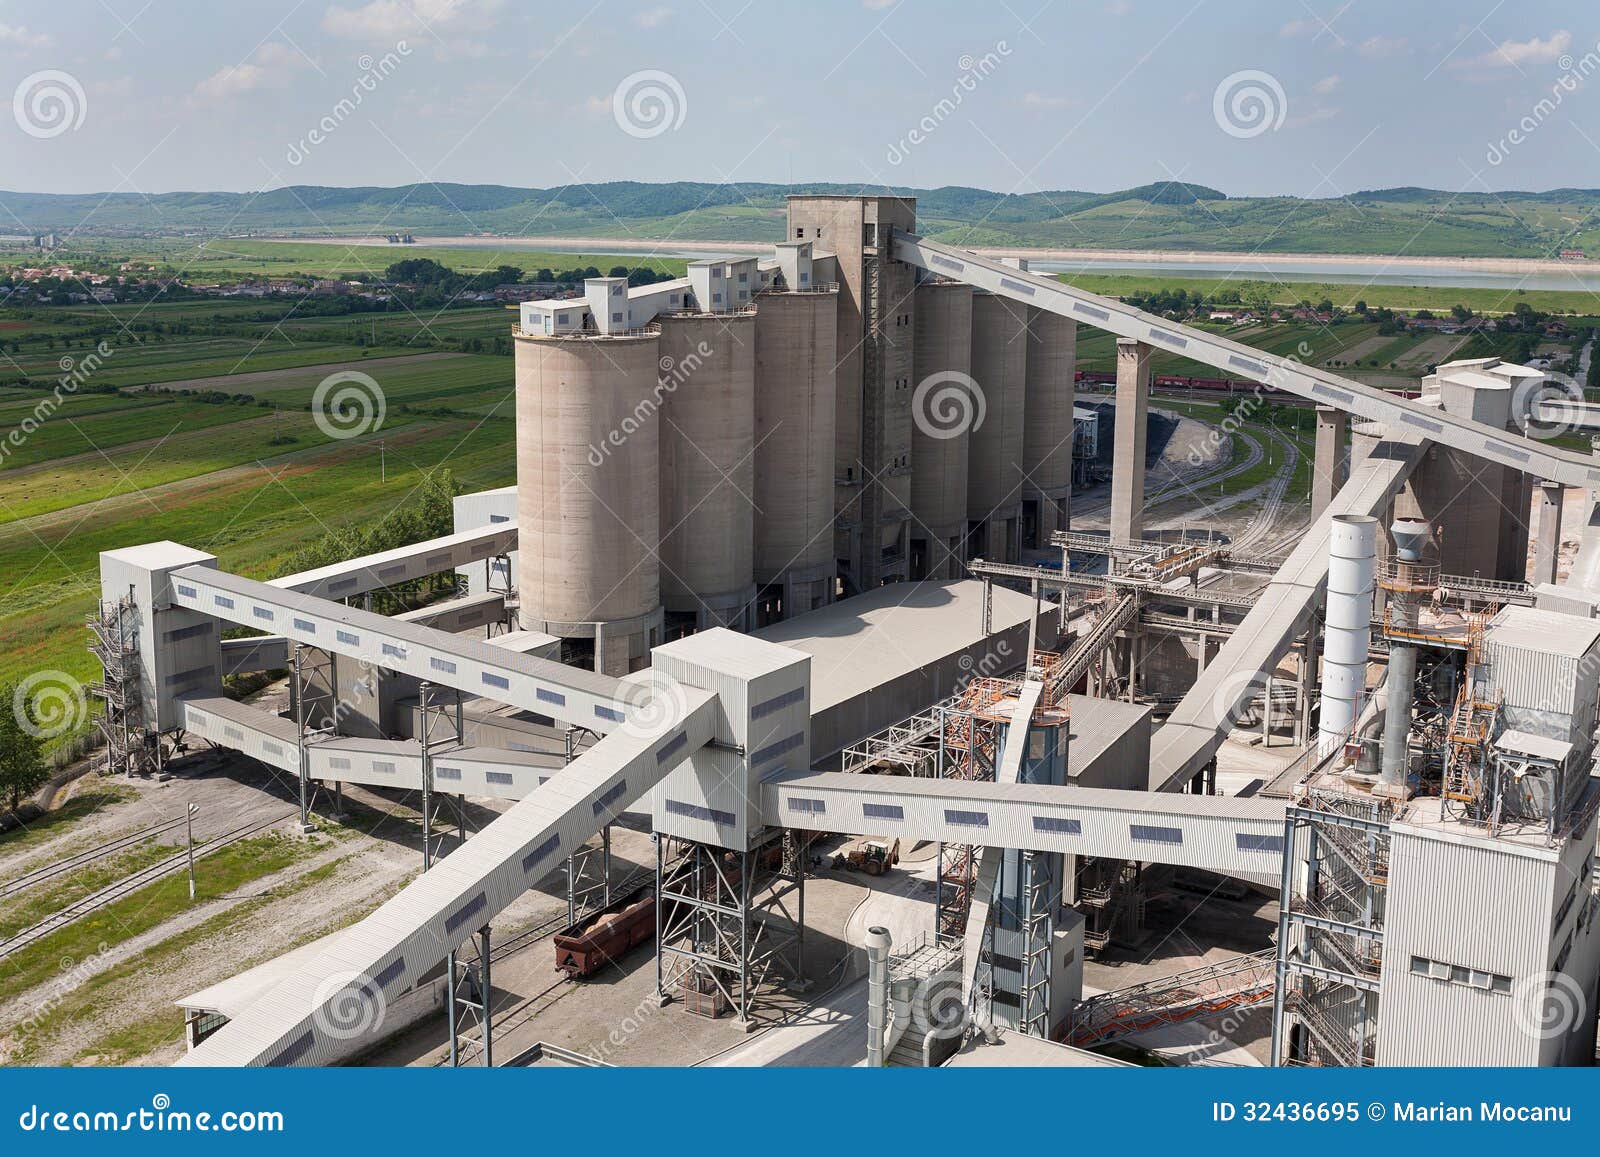 Cement Factory Royalty Free Stock Photo - Image: 32436695